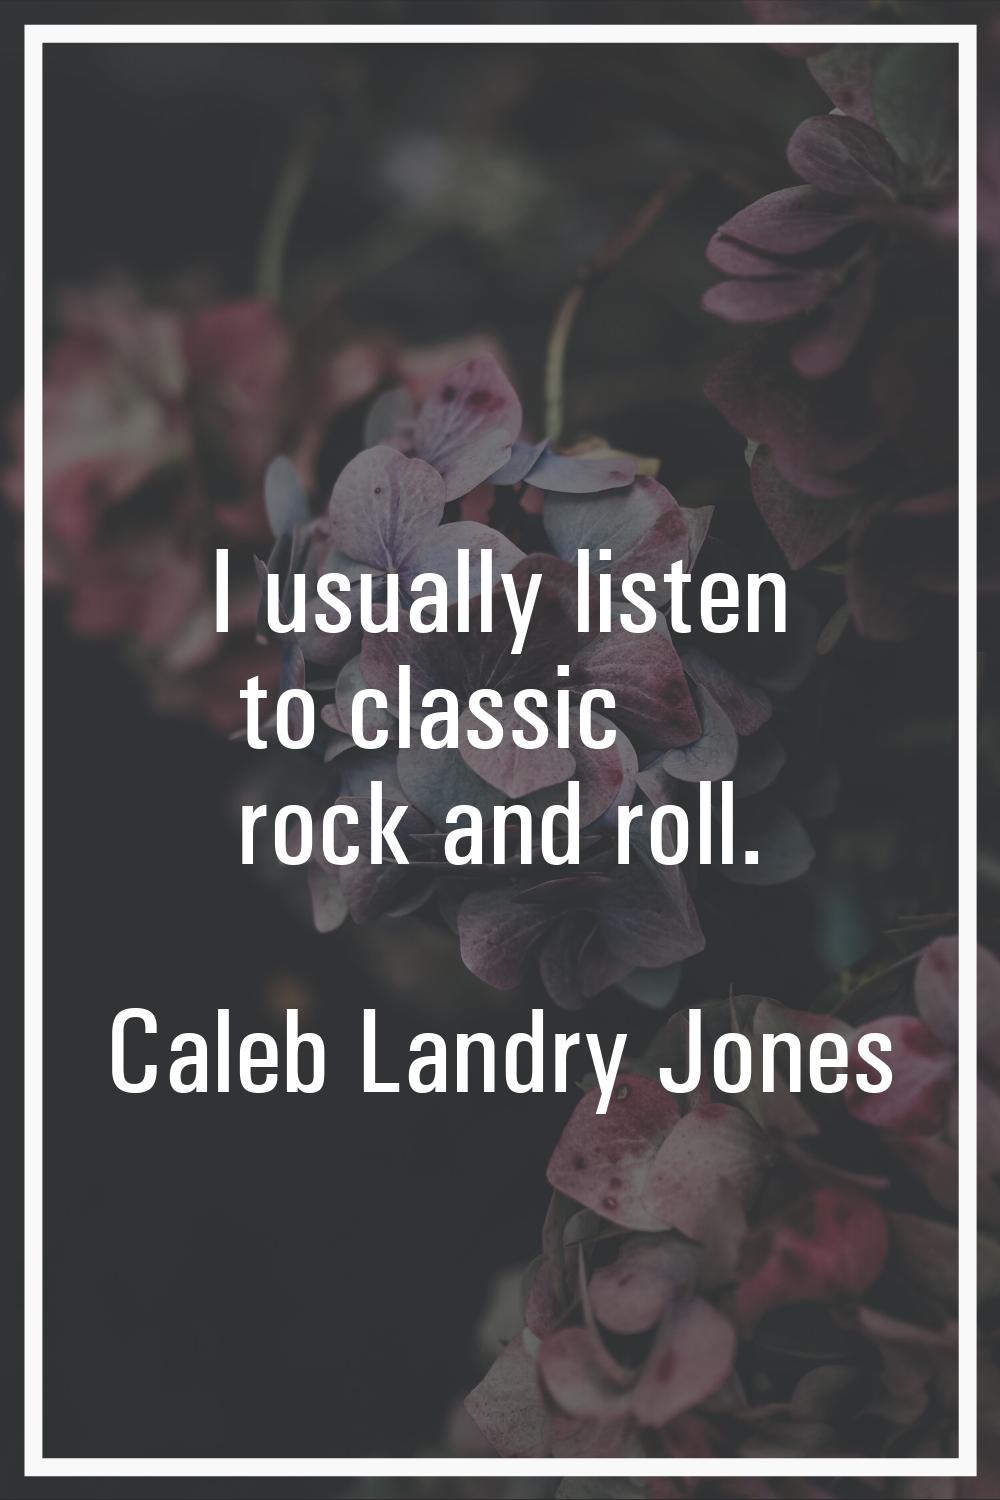 I usually listen to classic rock and roll.